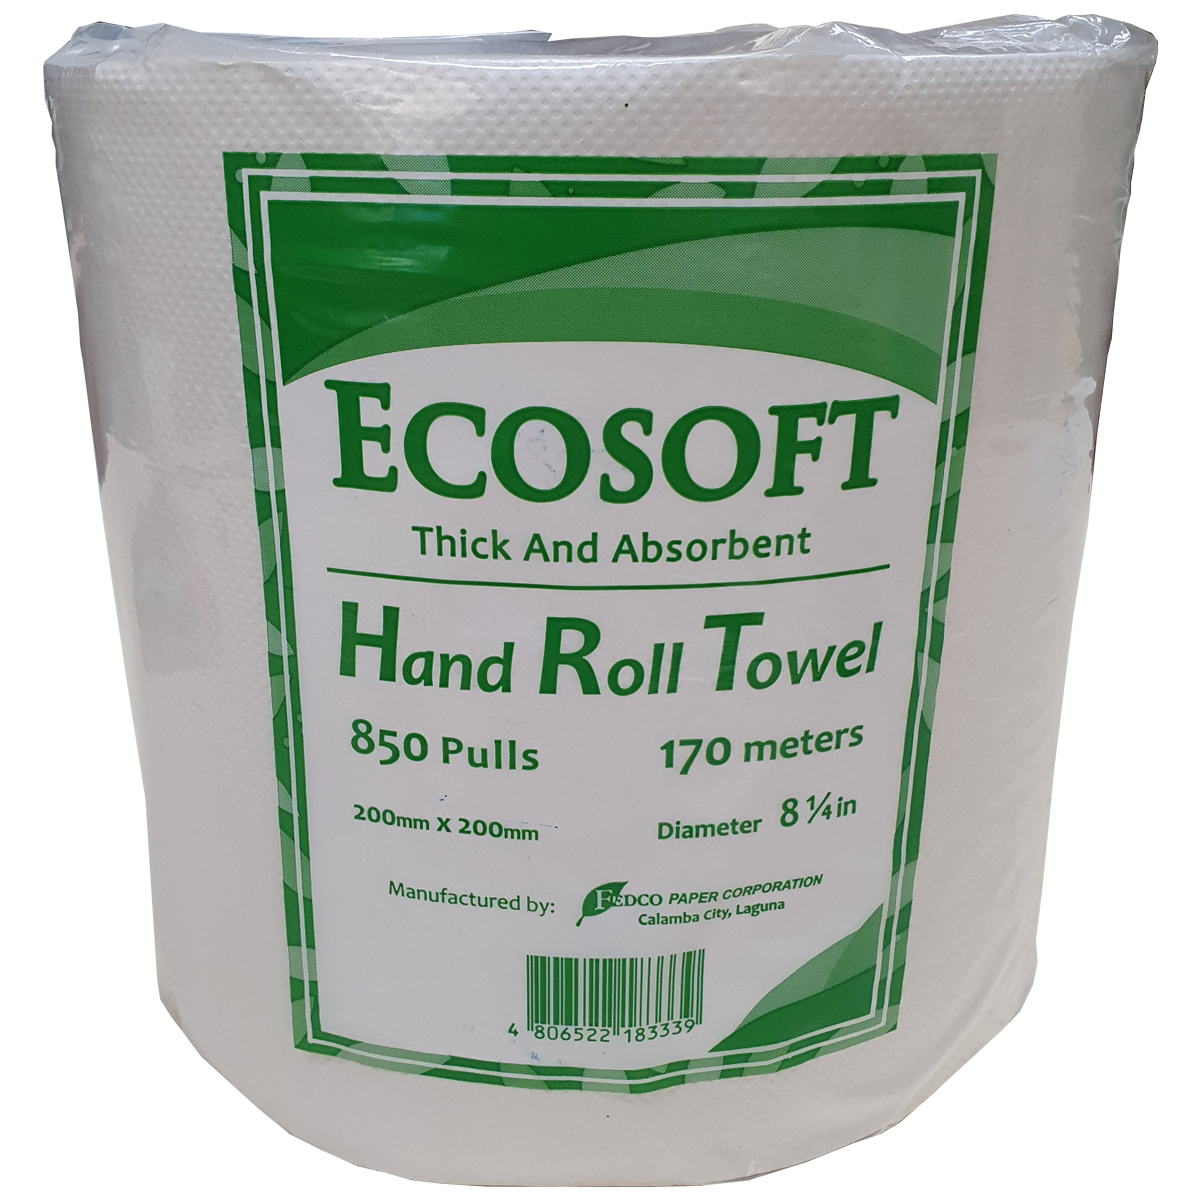 Jumbo Ecosoft Thick and Absorbent Hand Roll Towel (170m) 850 pulls